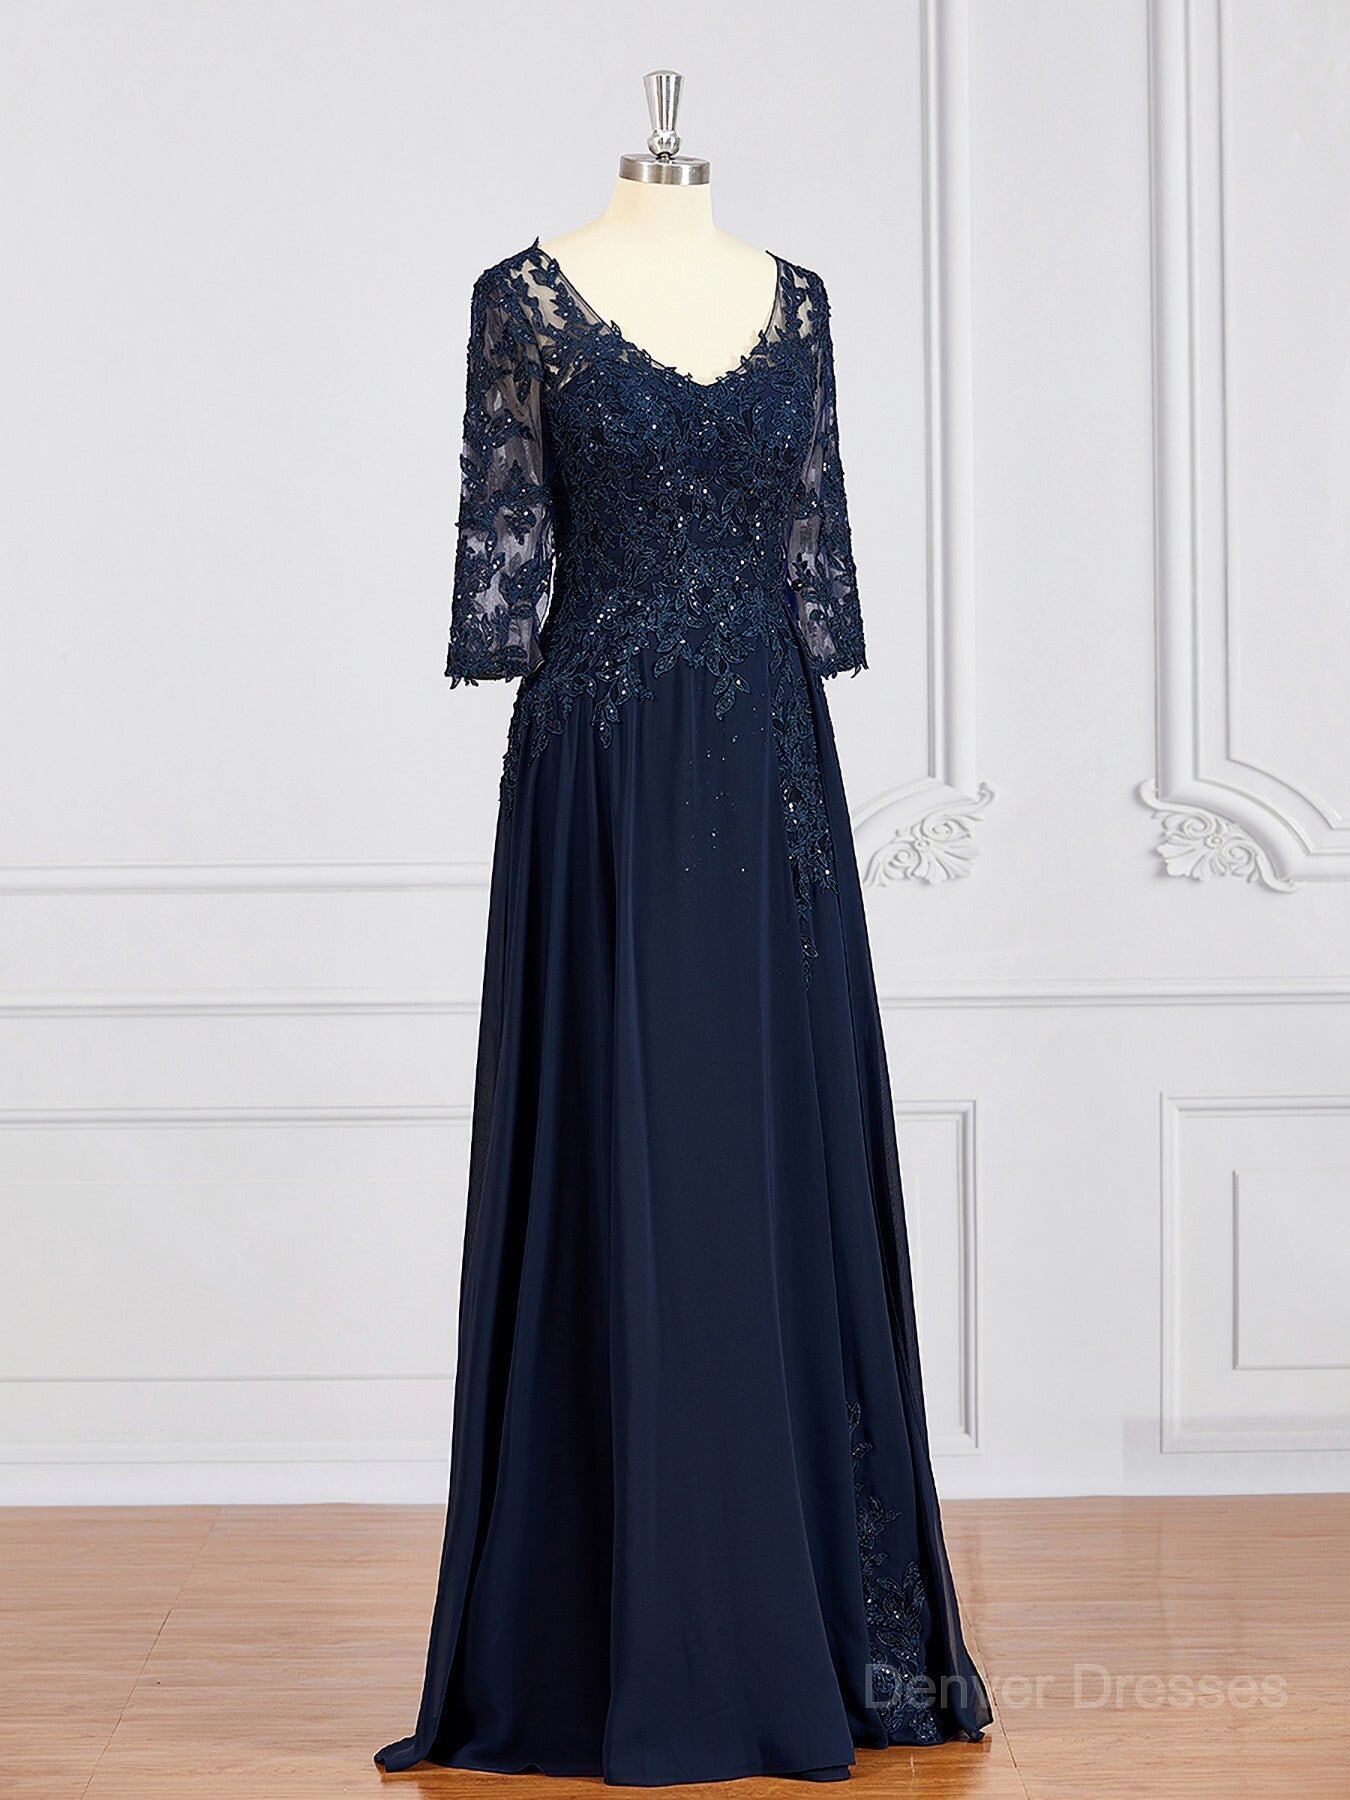 Formal Dress For Weddings, A-Line/Princess V-neck Chiffon Floor-Length Mother of the Bride Dresses With Appliques Lace